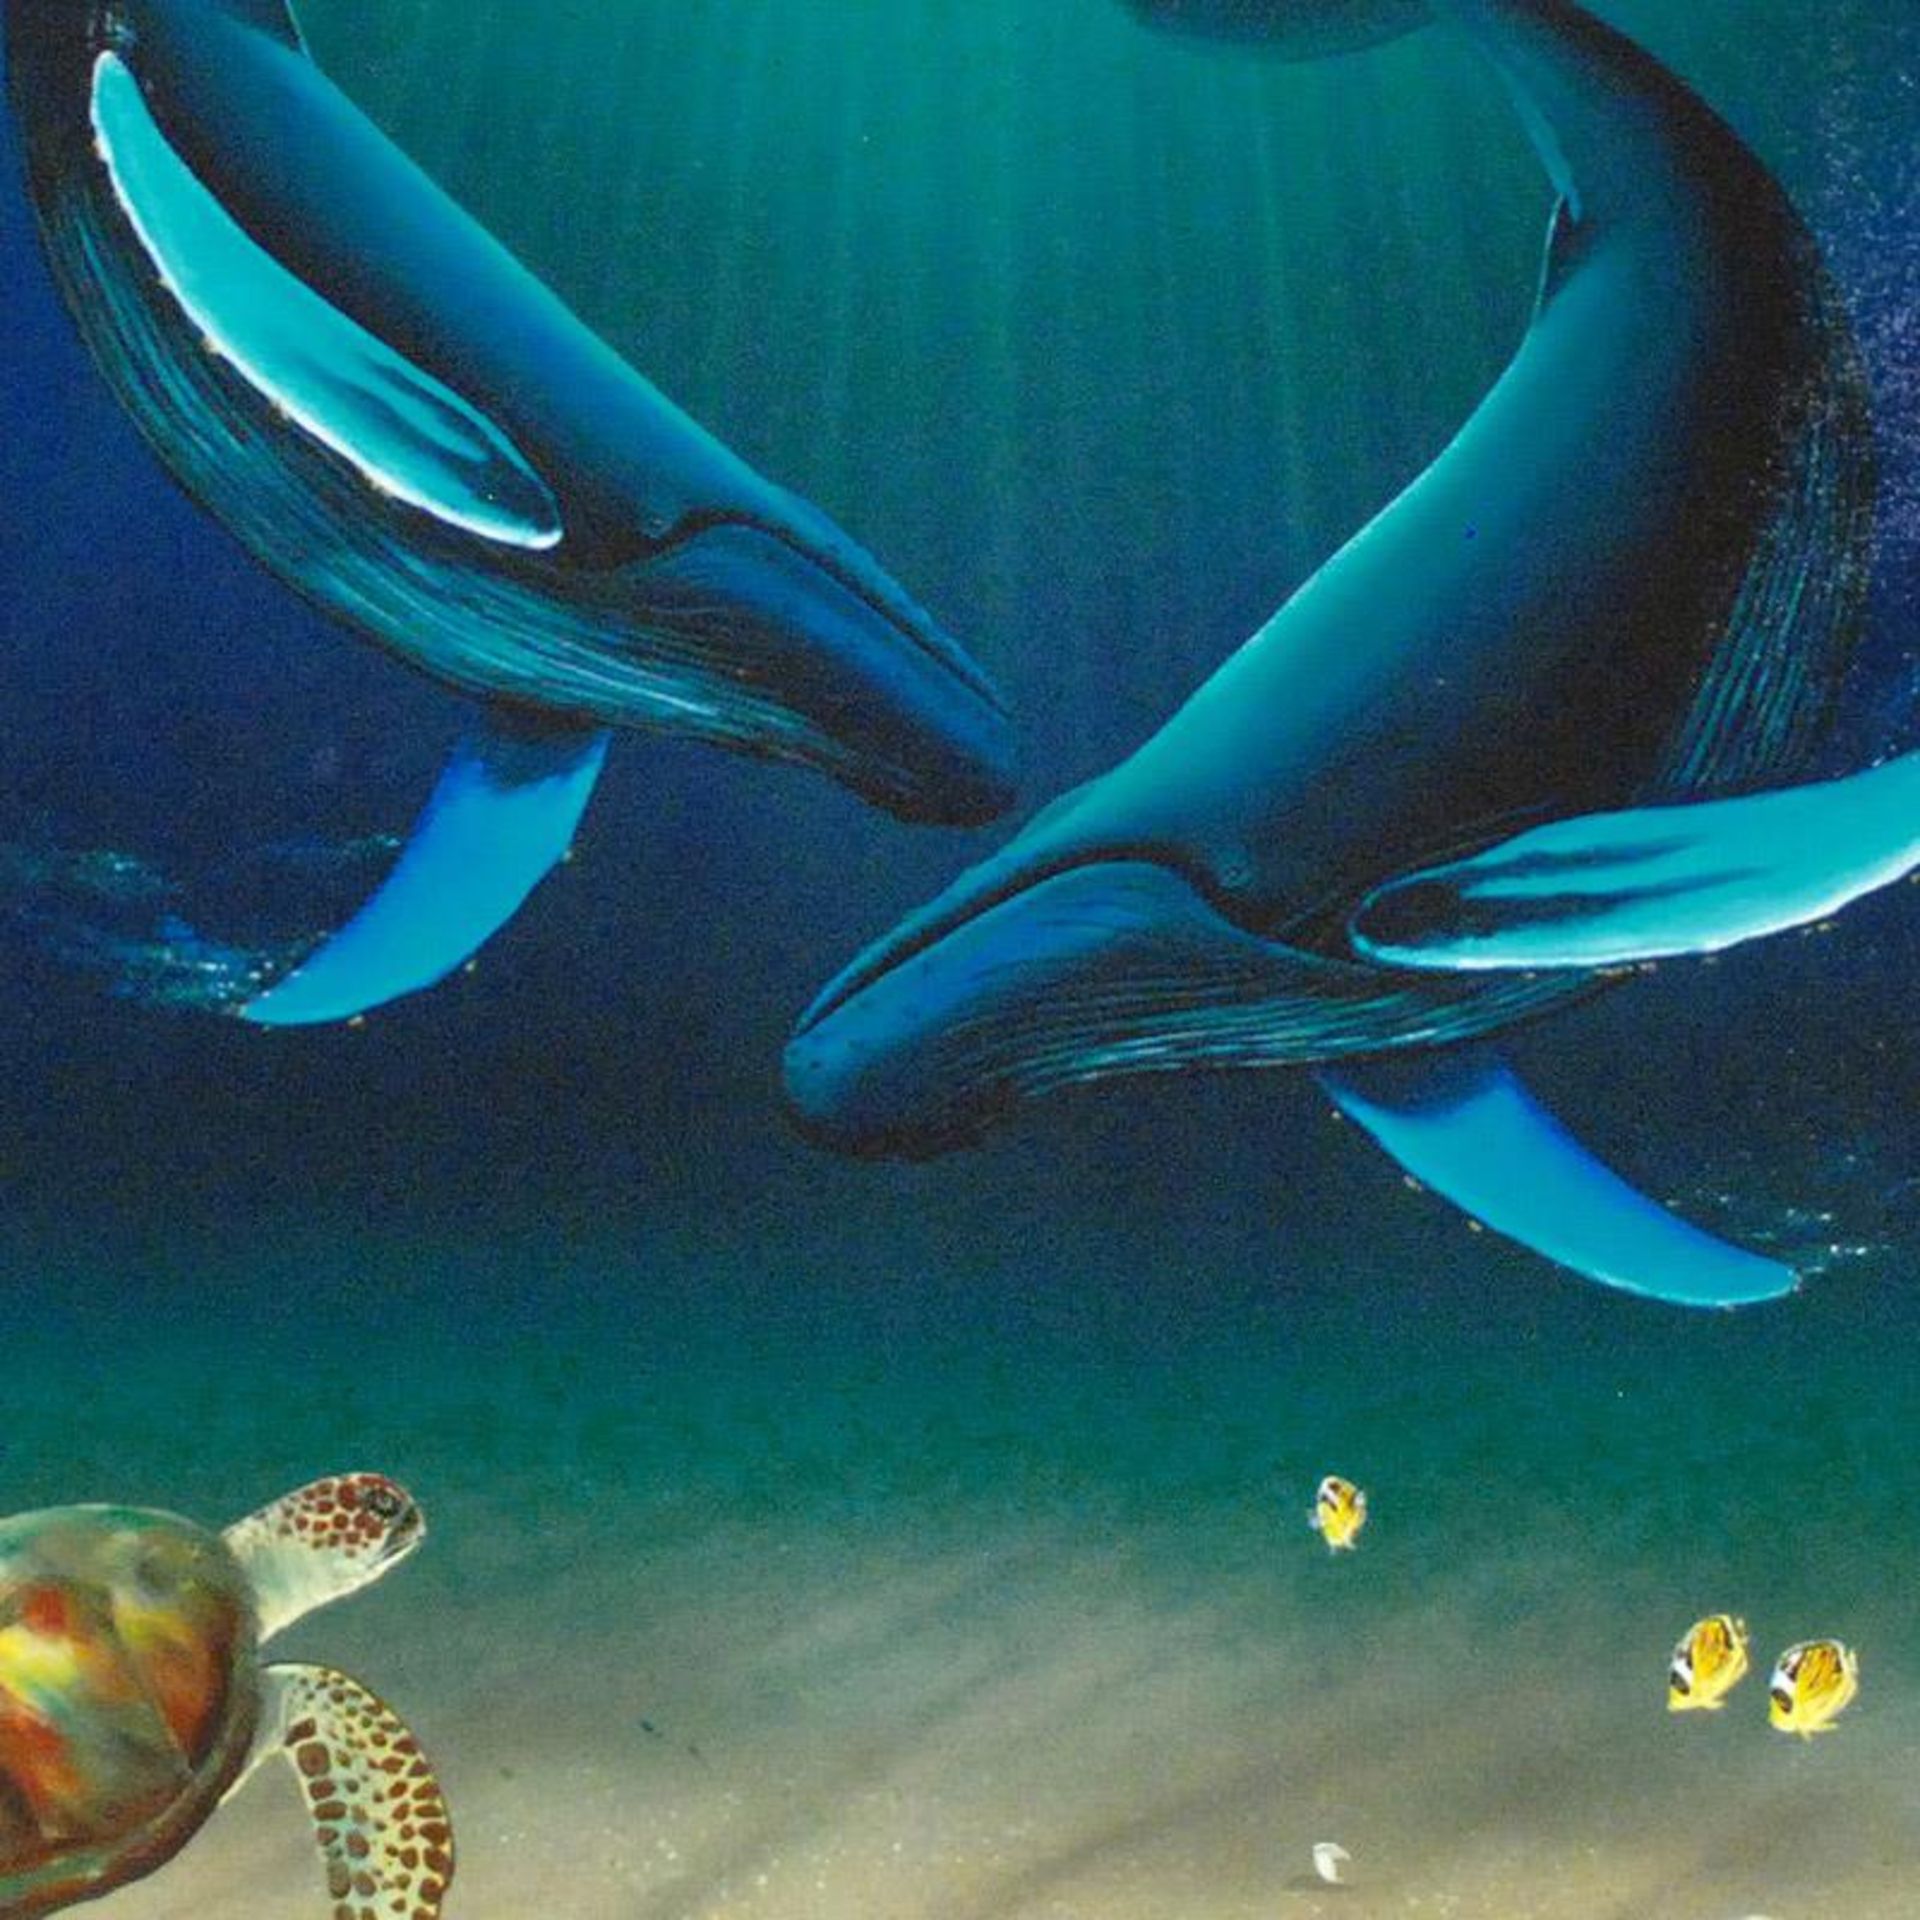 "In the Company of Whales" Limited Edition Giclee on Canvas by renowned artist W - Image 2 of 2